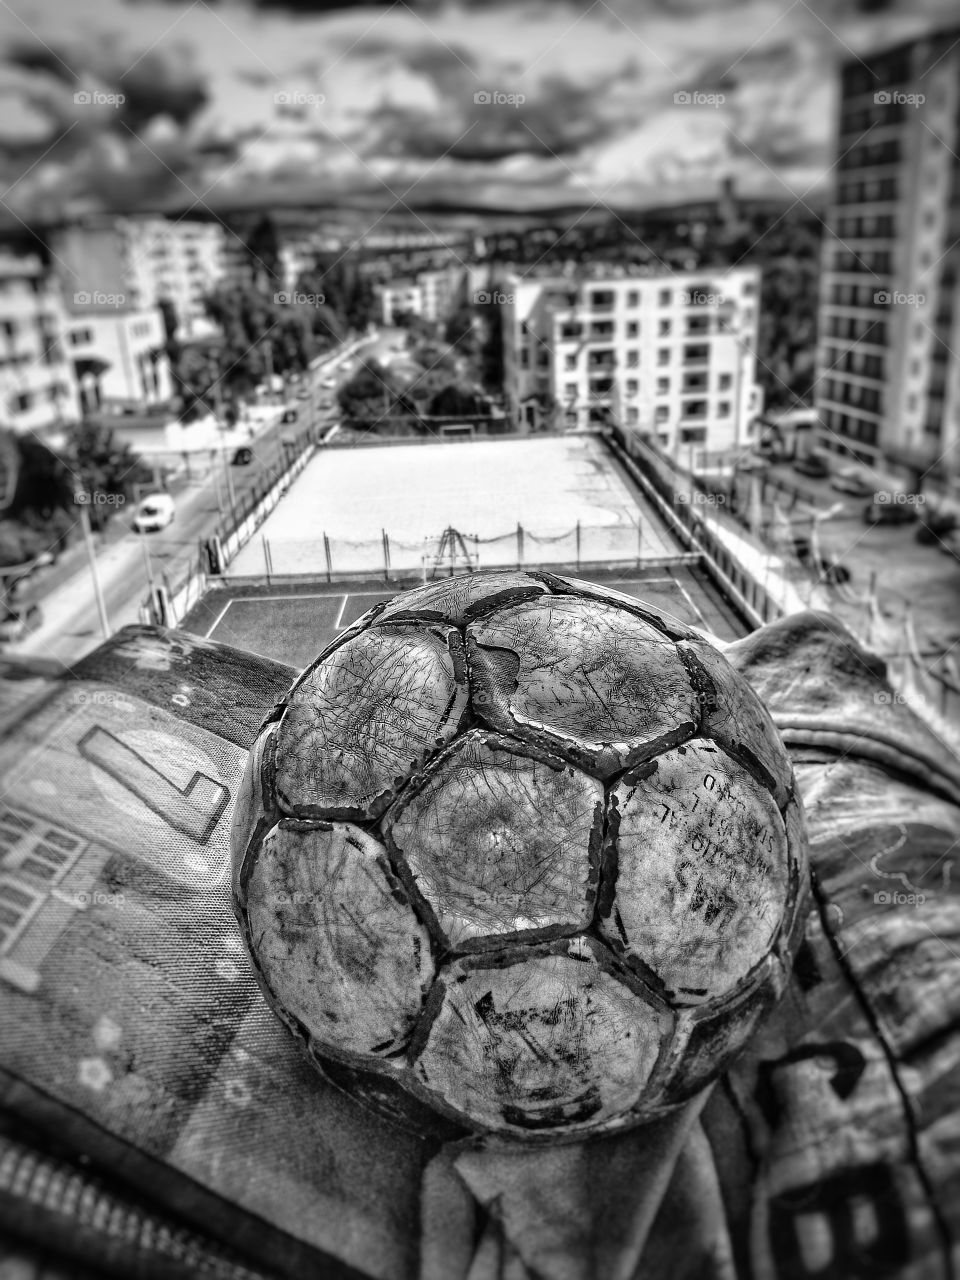 black and white soccer ball from above a building